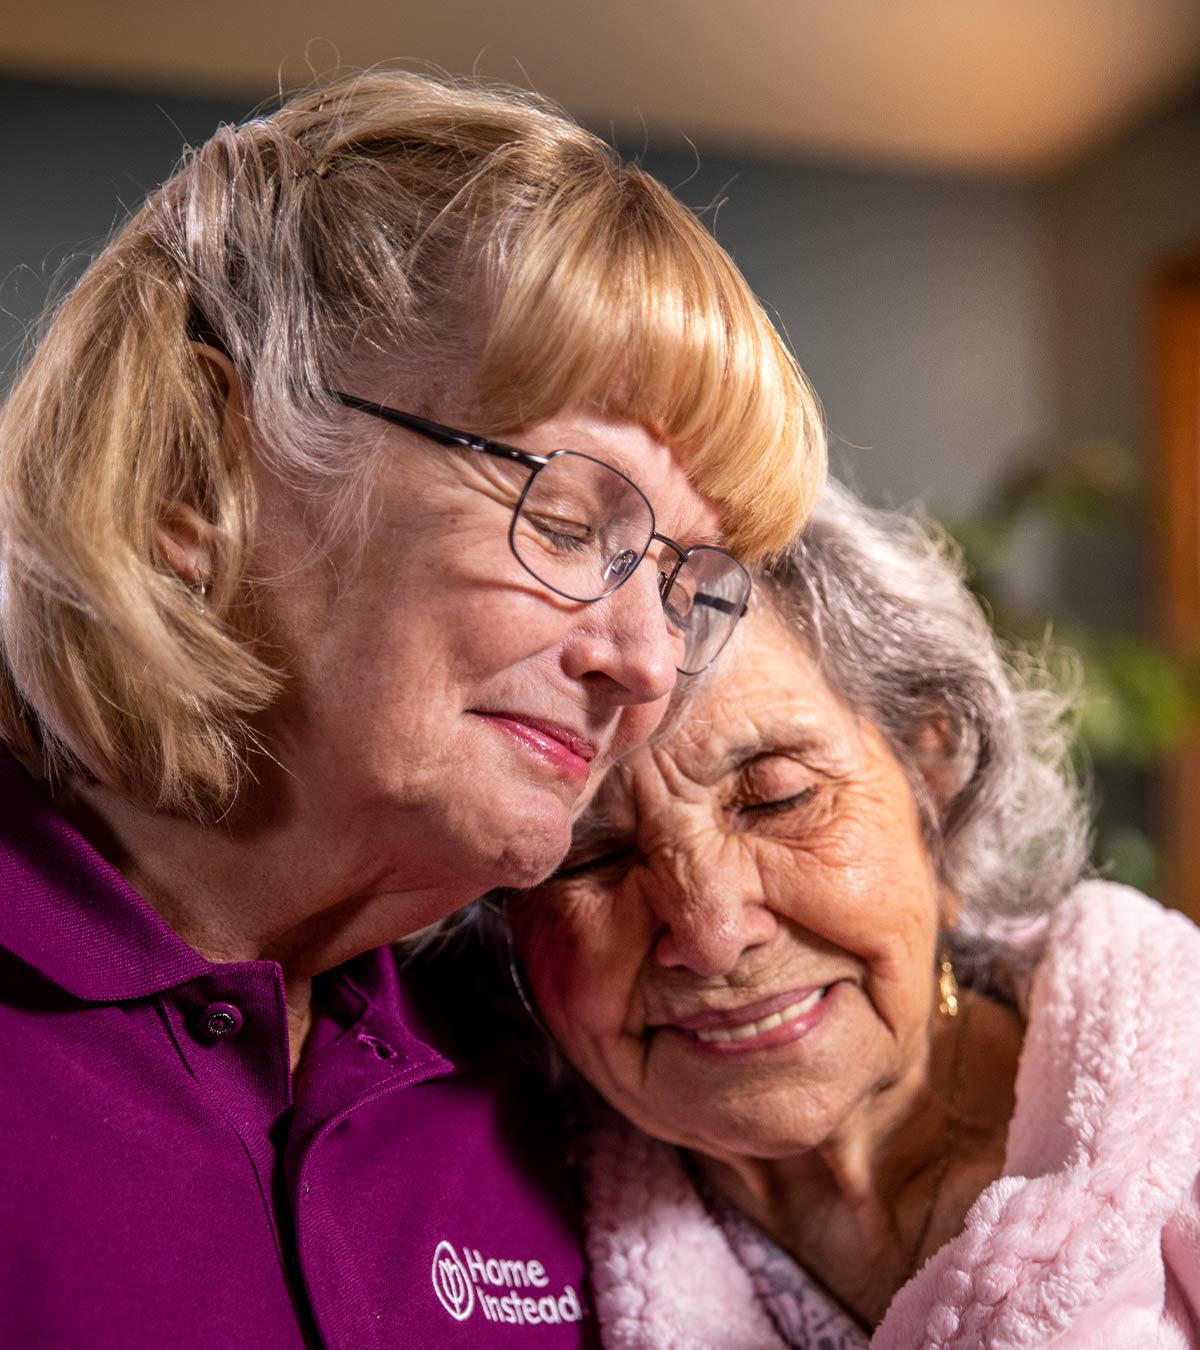 CAREGiver providing in-home senior care services. Home Instead of Joliet, IL provides Elder Care to aging adults. 